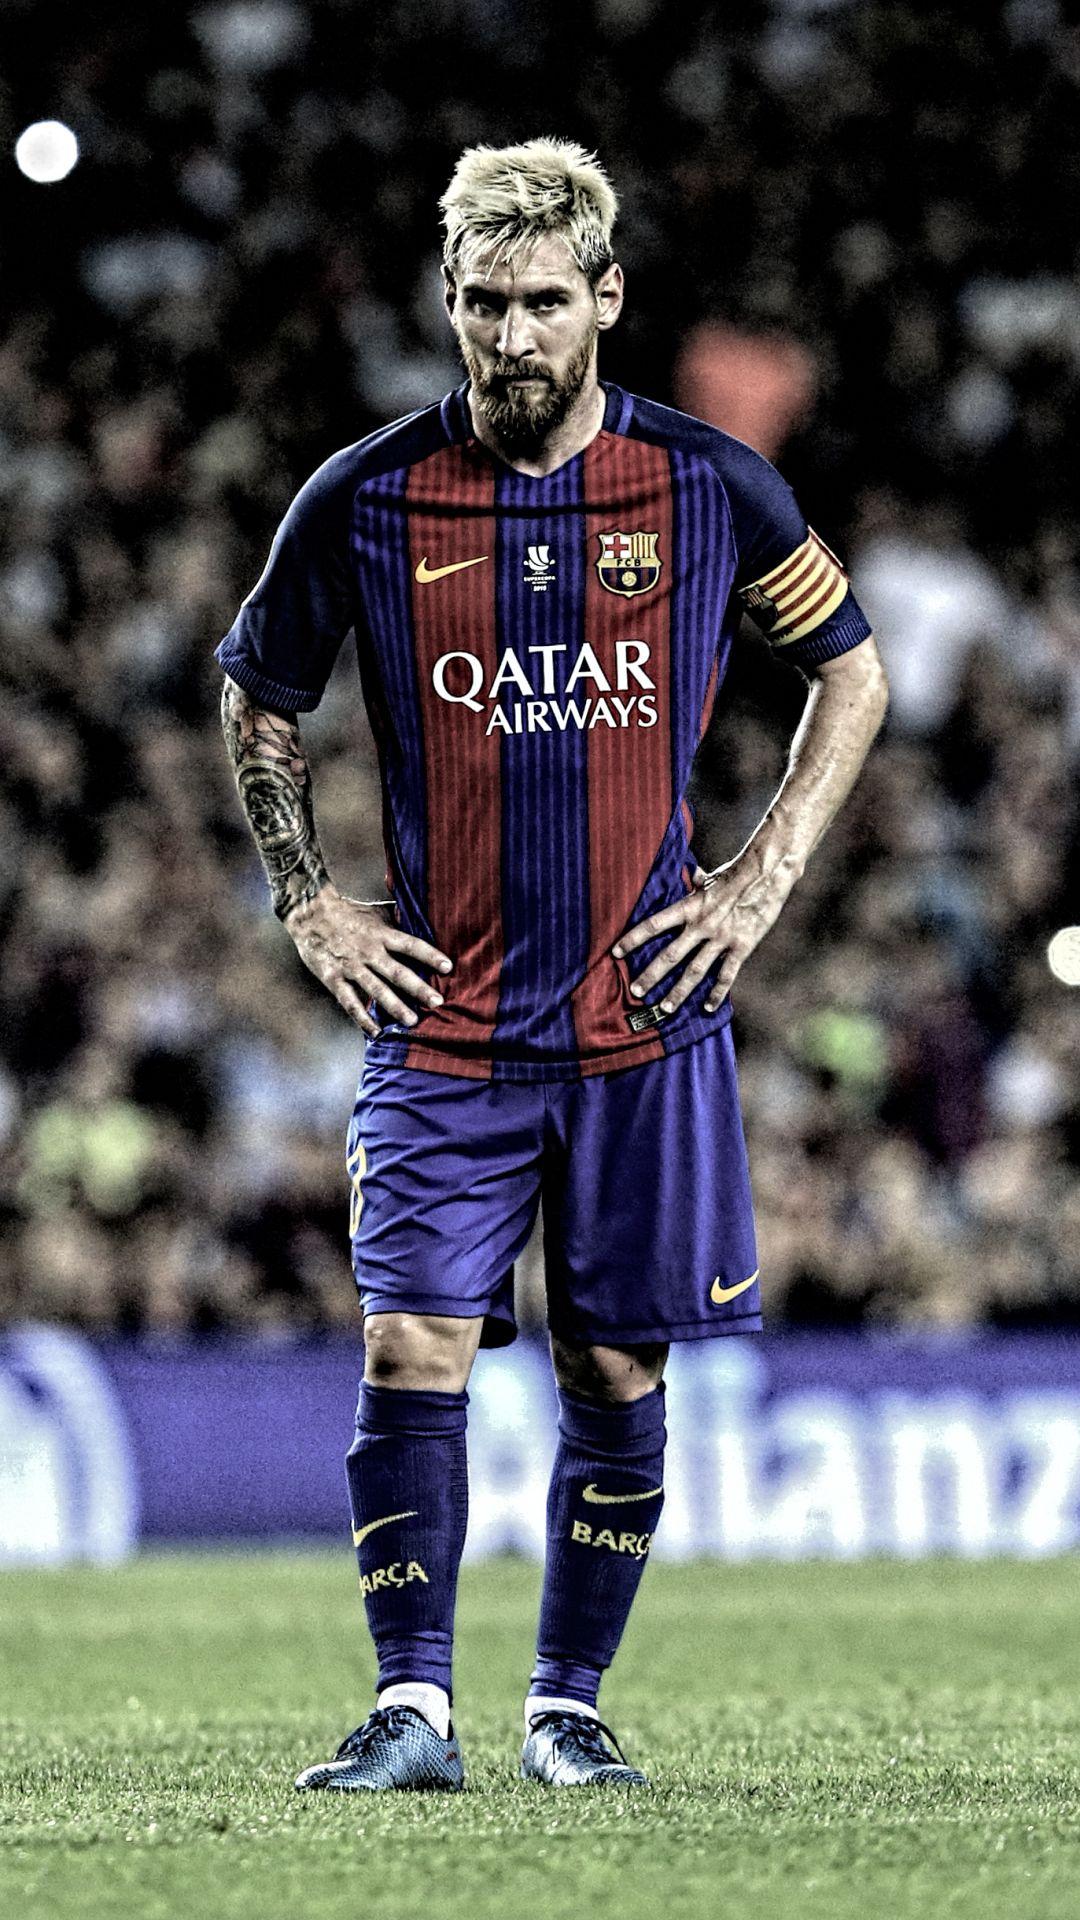 Messi Iphone Wallpapers